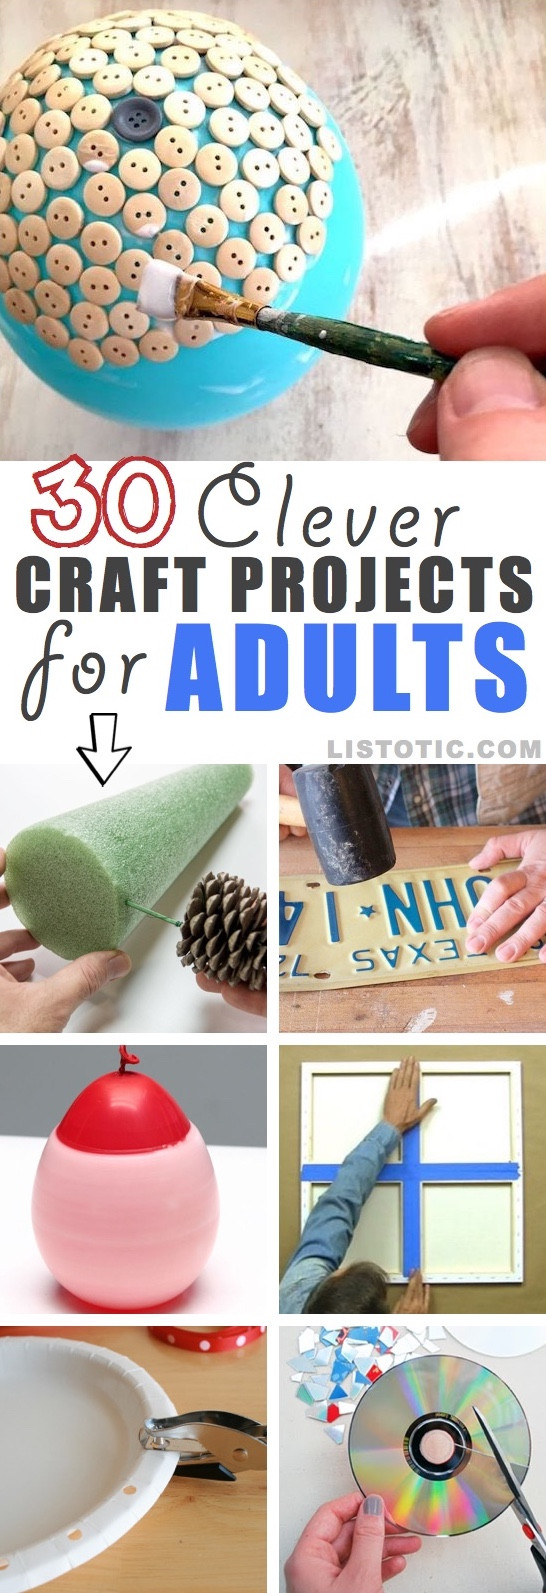 New Craft Ideas For Adults
 30 Easy Craft Ideas That Will Spark Your Creativity DIY